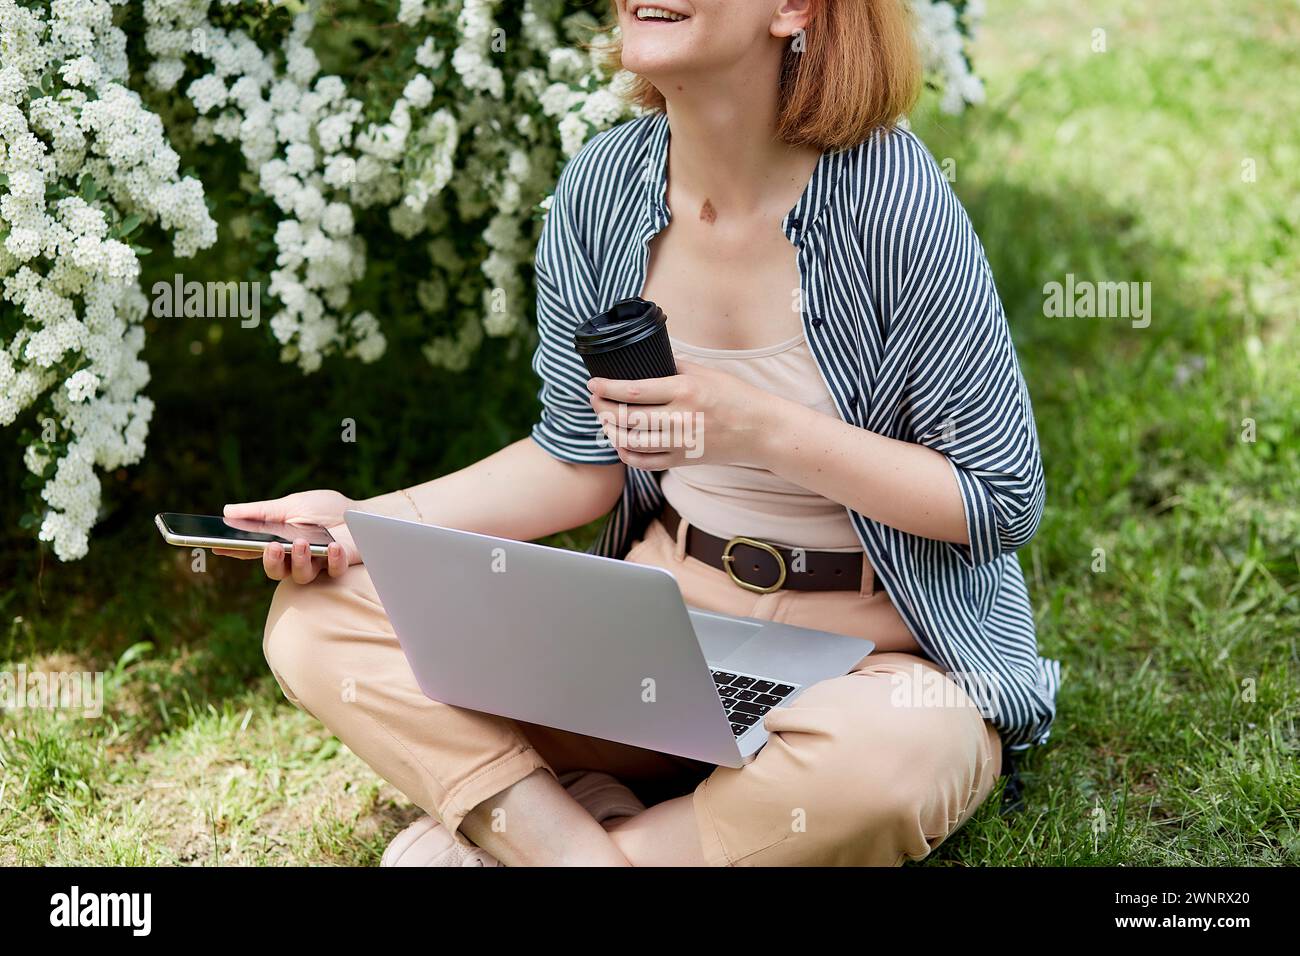 Freelance lifestyle with laptop, coffee and smartphone, woman surrounded by nature while working on her laptop. Stock Photo